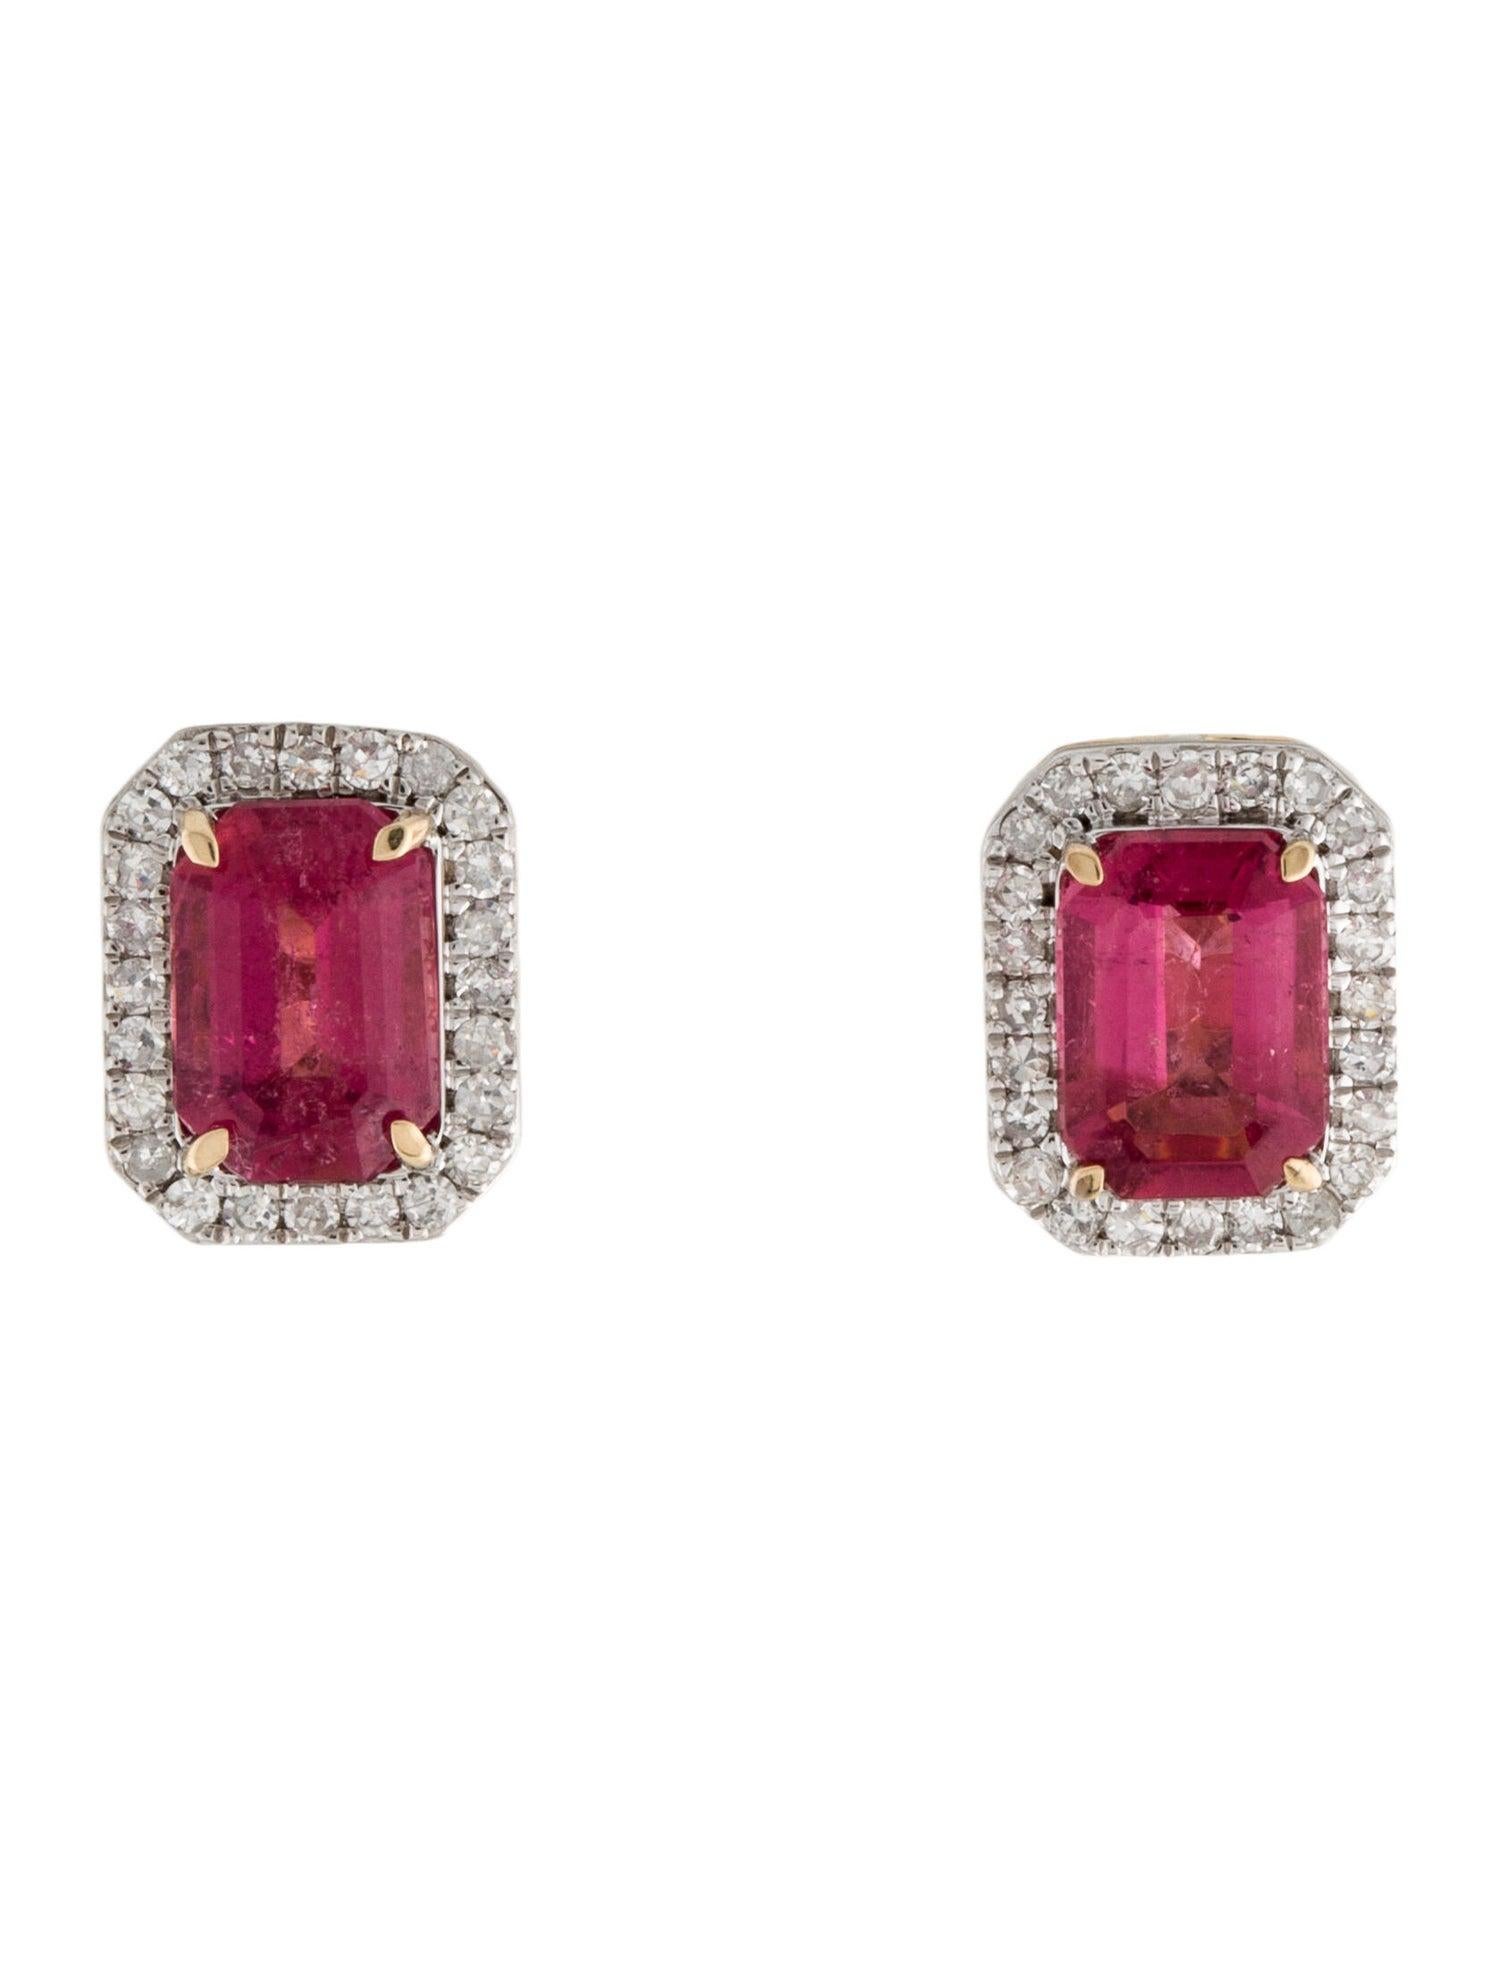 Gorgeous 14K 2.12ctw Tourmaline Studs - Stunning Gemstone Earrings In New Condition For Sale In Holtsville, NY